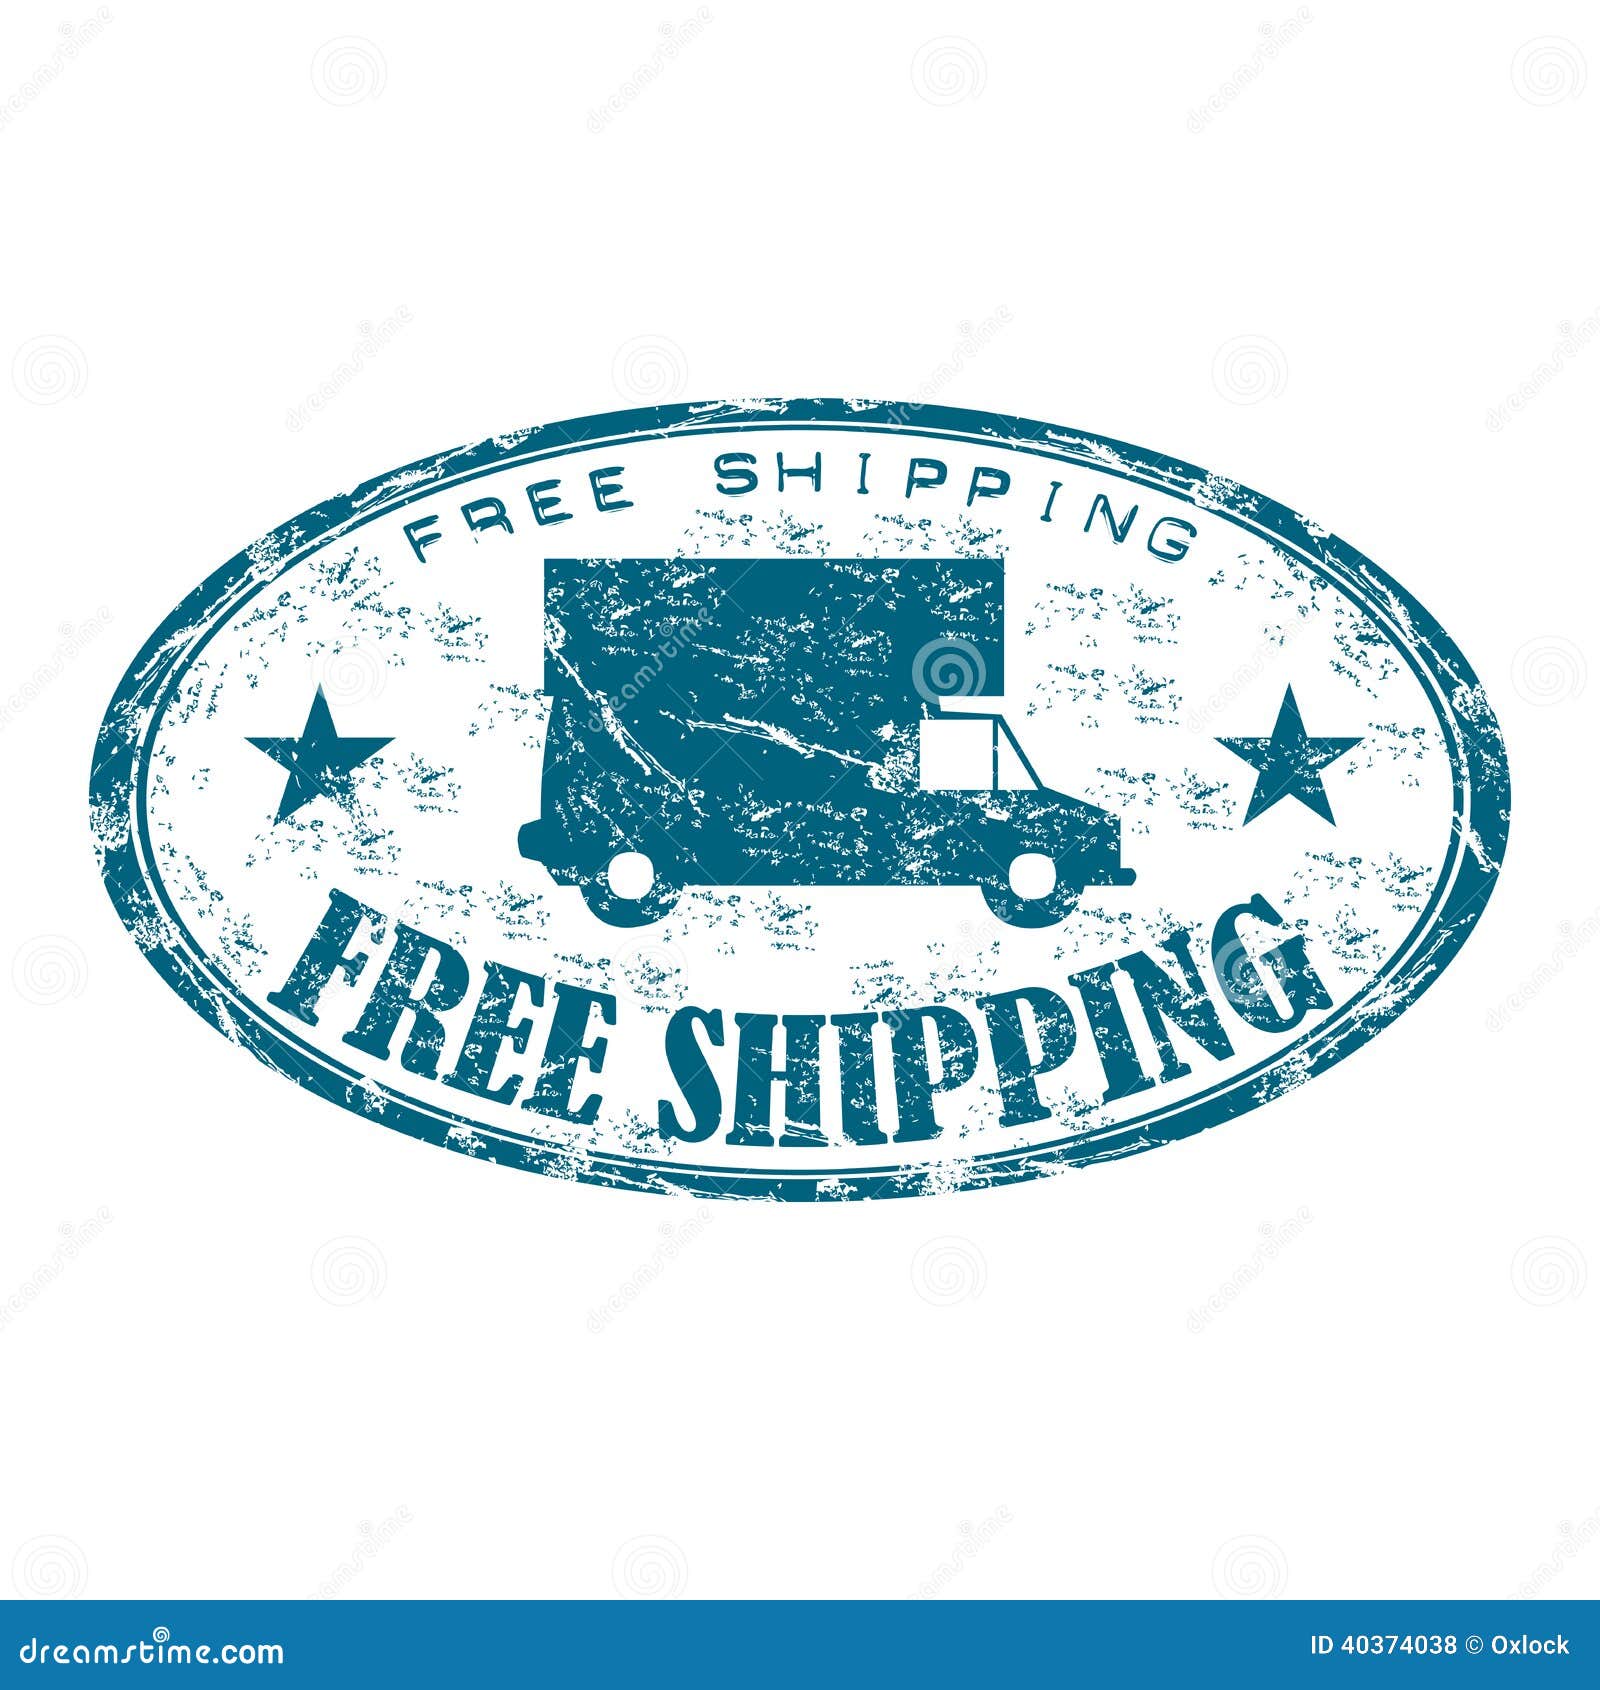 Same Day Shipping Grunge Rubber Stamp Stock Vector (Royalty Free